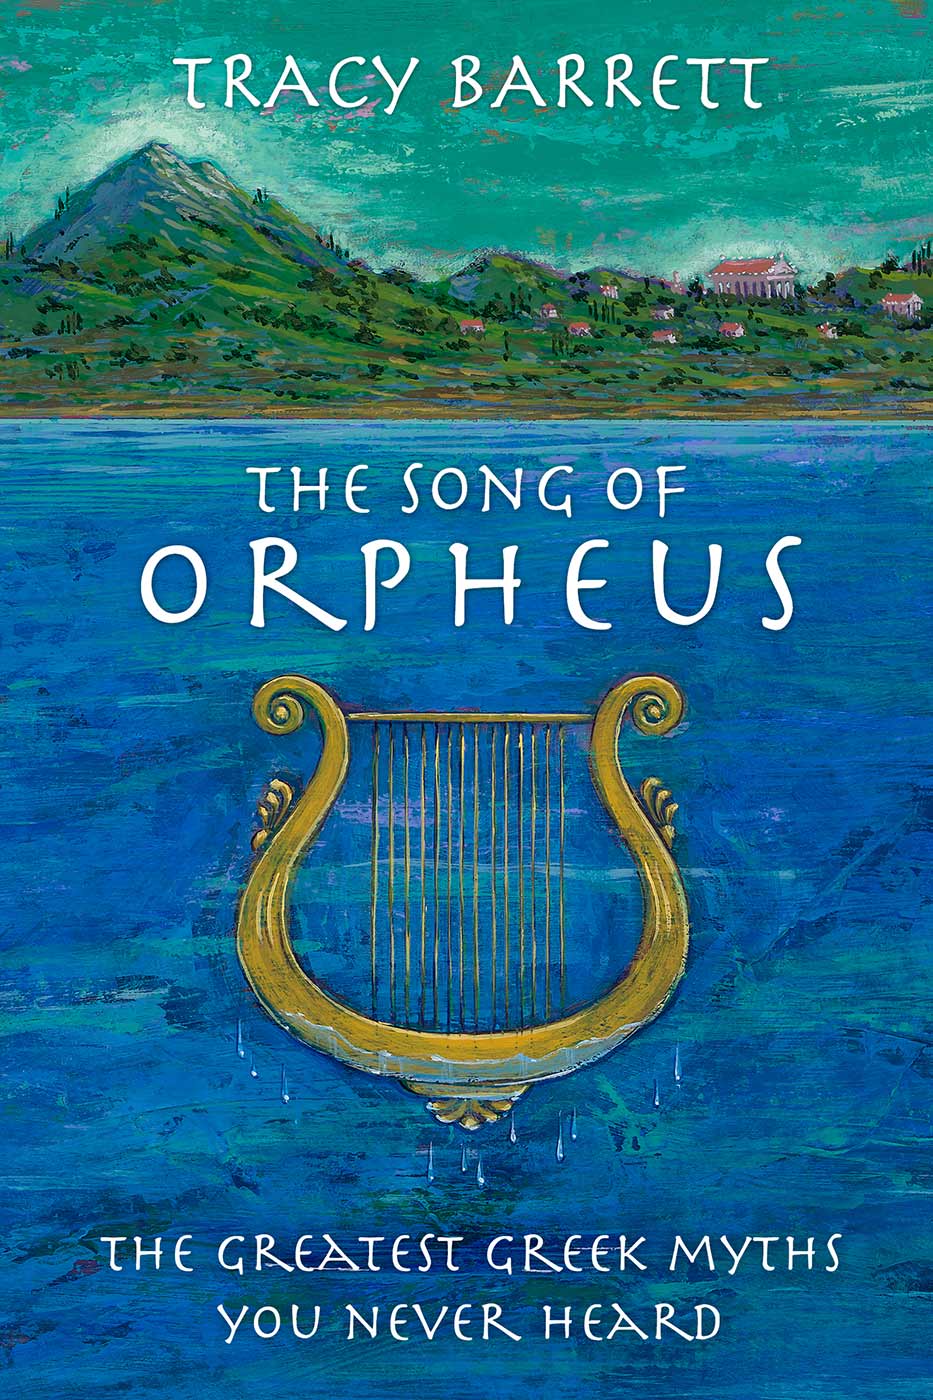 The Song of Orpheus (2016) by Tracy Barrett